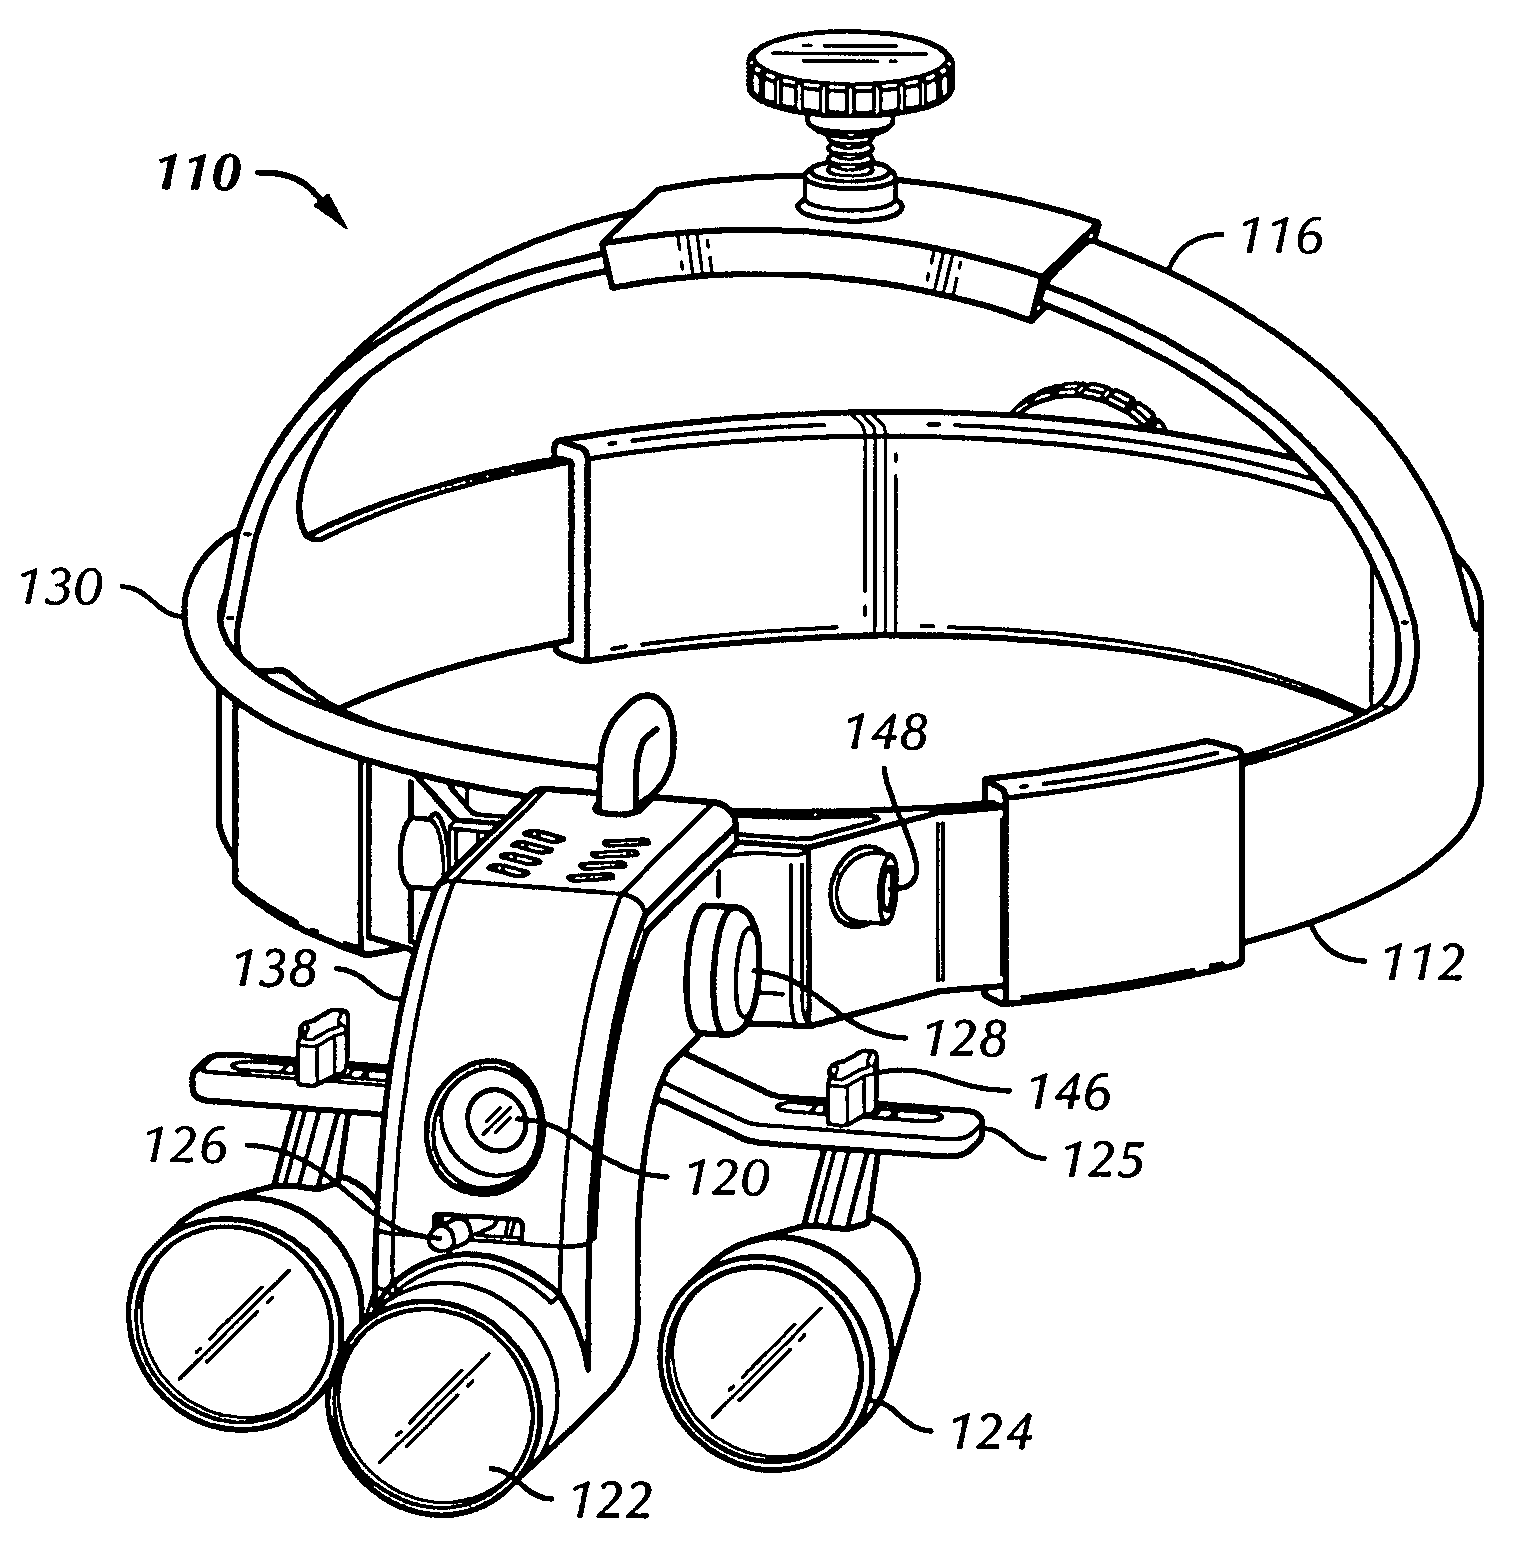 Headset mounted apparatus mounting a visor with interchangeable filter sets